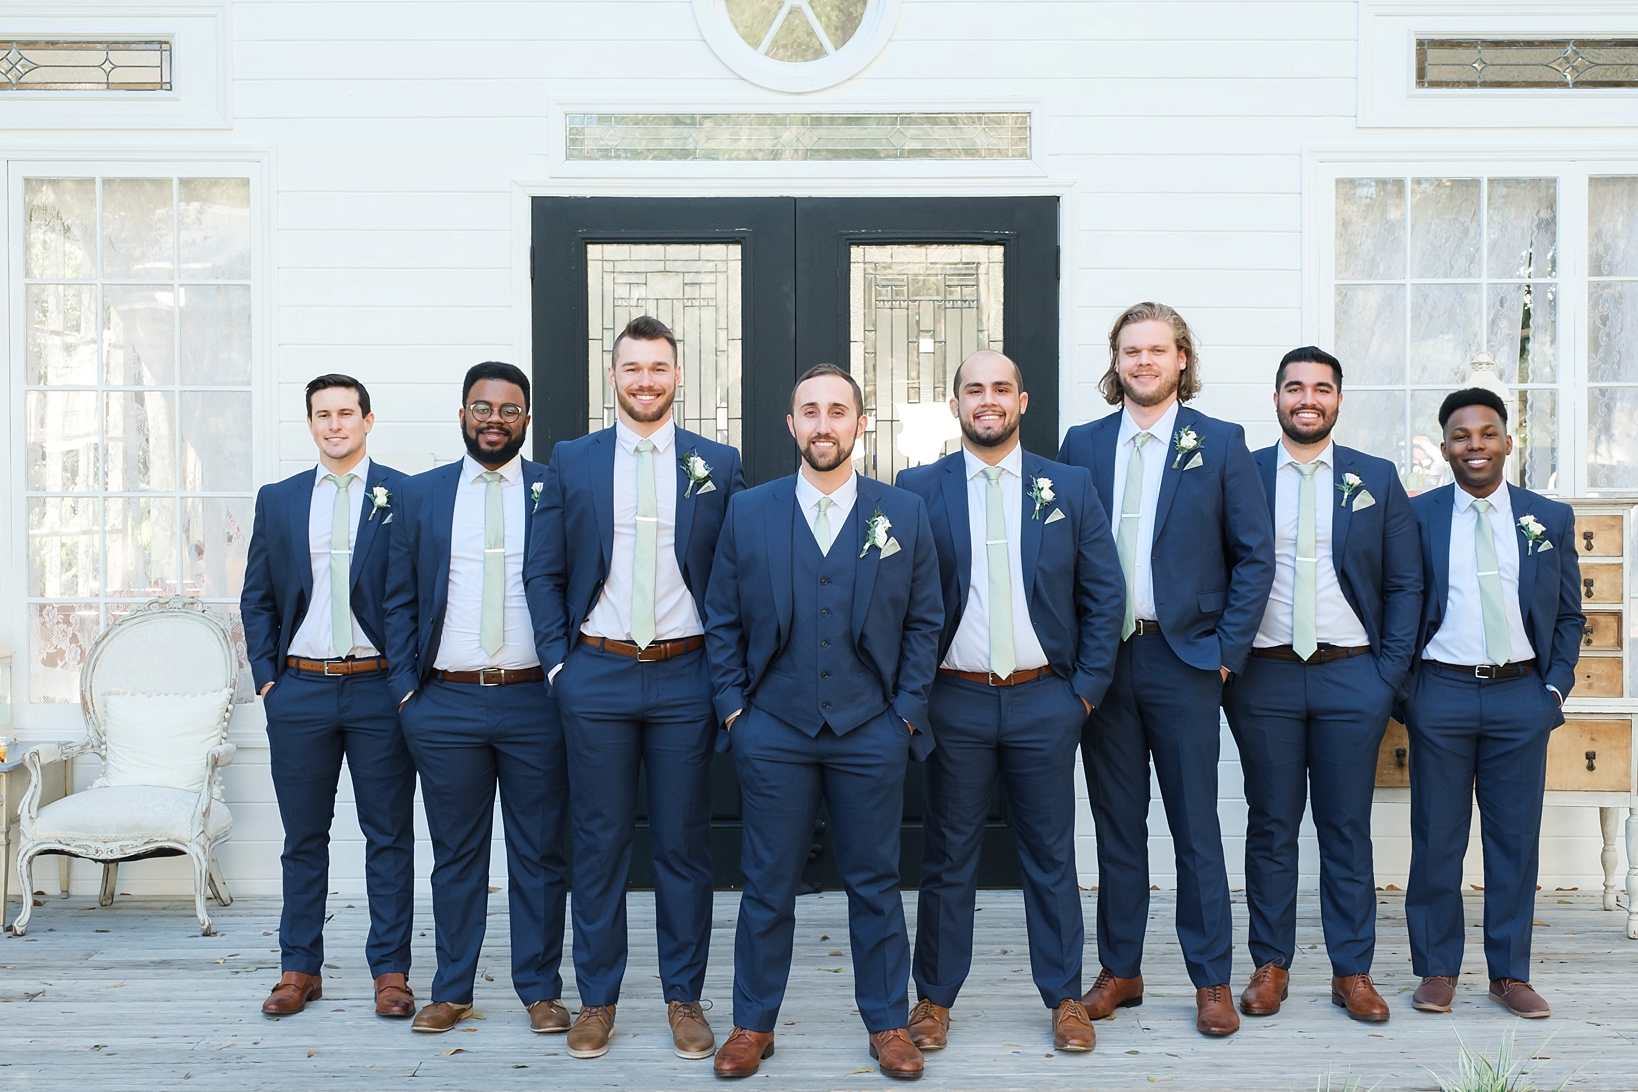 The Groom and his Groomsmen standing on the porch of the chapel at Cross Creek Ranch in navy blue suits